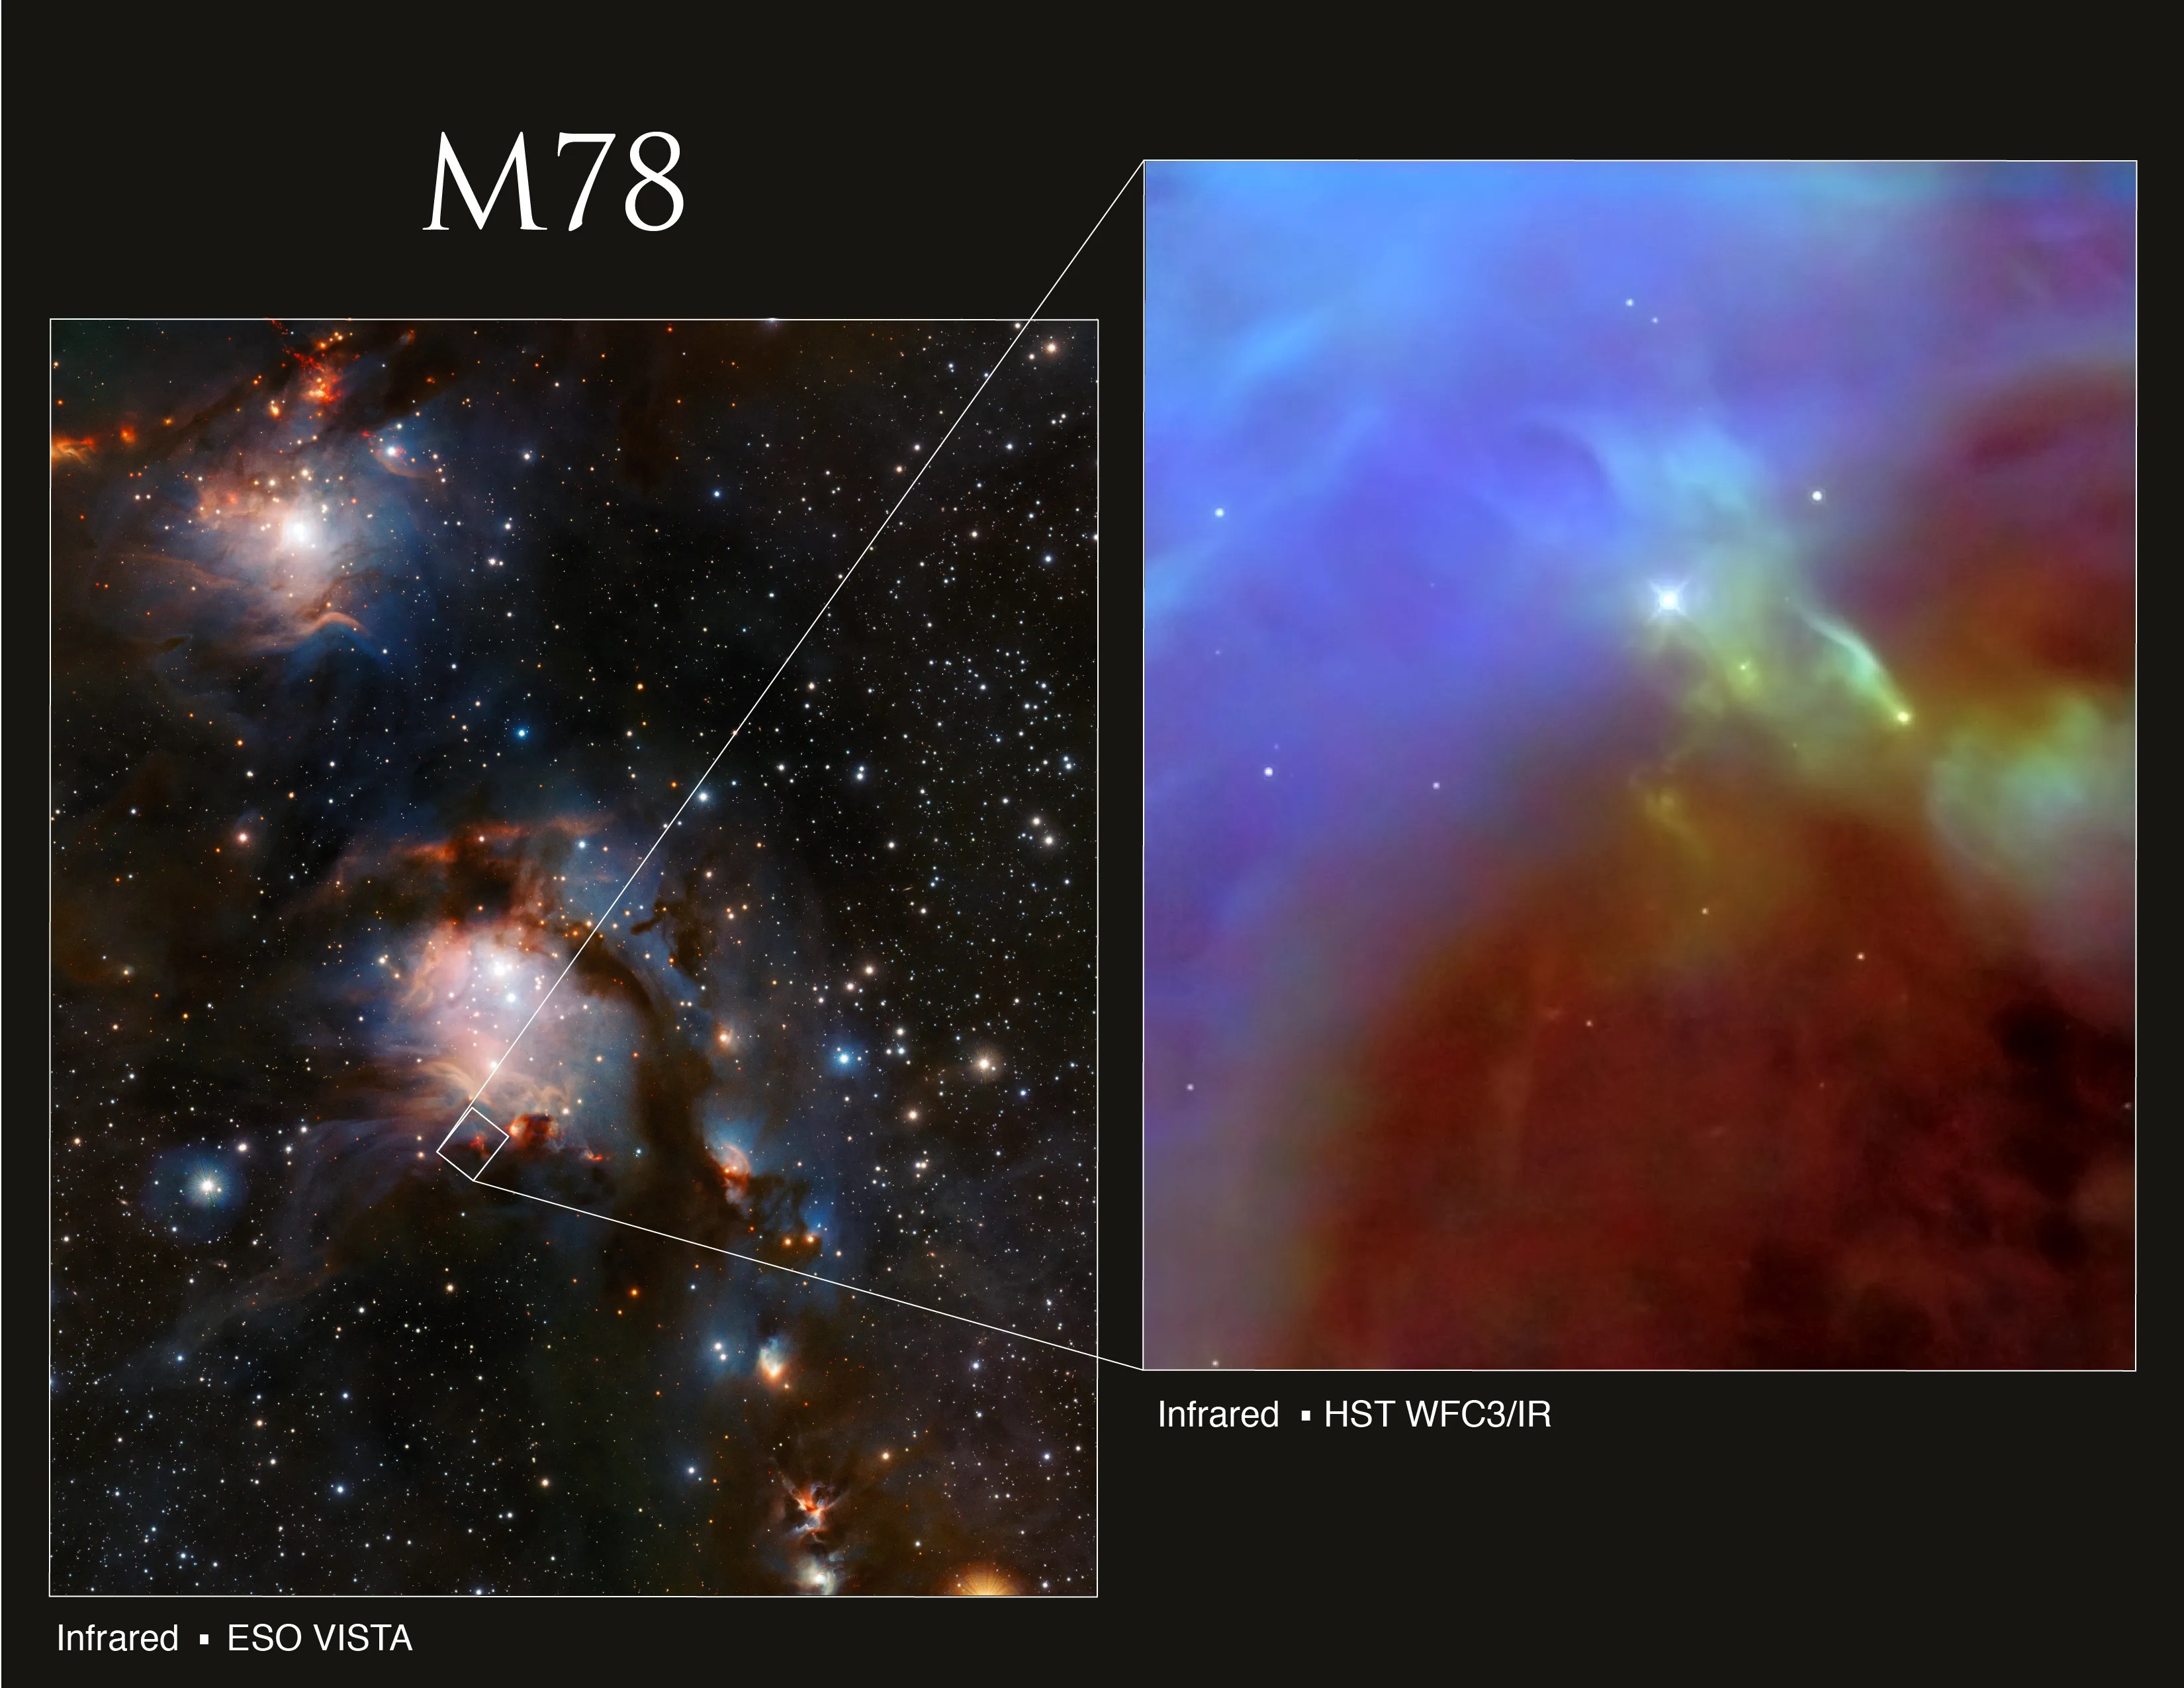 Two images of M78 are seen. On the left, a ground-based view shows a starry region of space with orange-ish glowing regions of gas and dust. On the right, a "pulled out" inset image shows a close-up of the nebula, mostly blue in the upper left diagonal half, and mostly brown and yellow in the lower right diagonal.